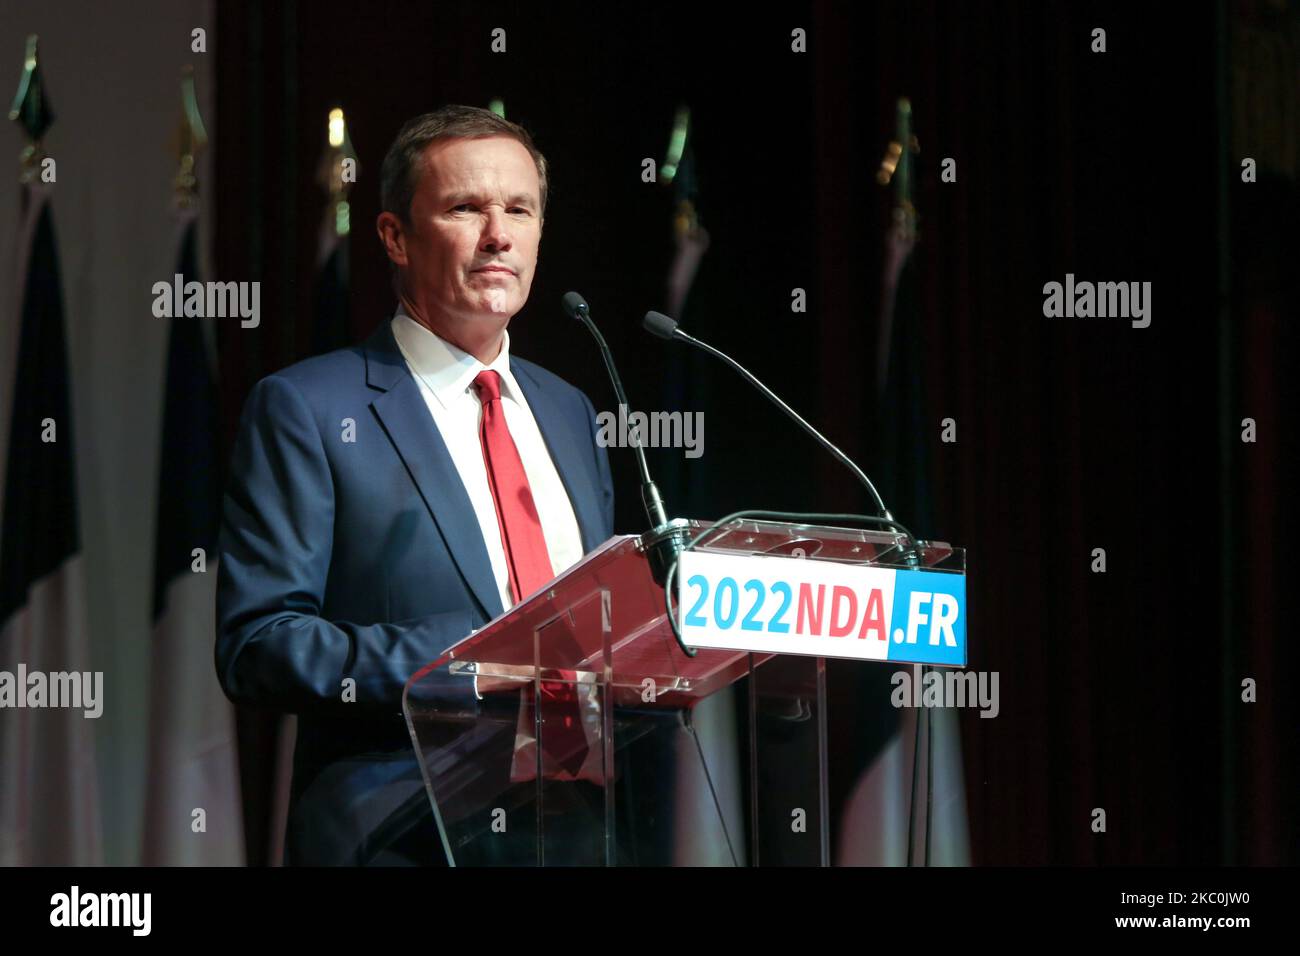 Head of "Debout la France" far-right party Nicolas Dupont-Aignan delivers a speech during a meeting marking the start of the political year, on September 26, 2020 in Paris, France. (Photo by Michel Stoupak/NurPhoto) Stock Photo